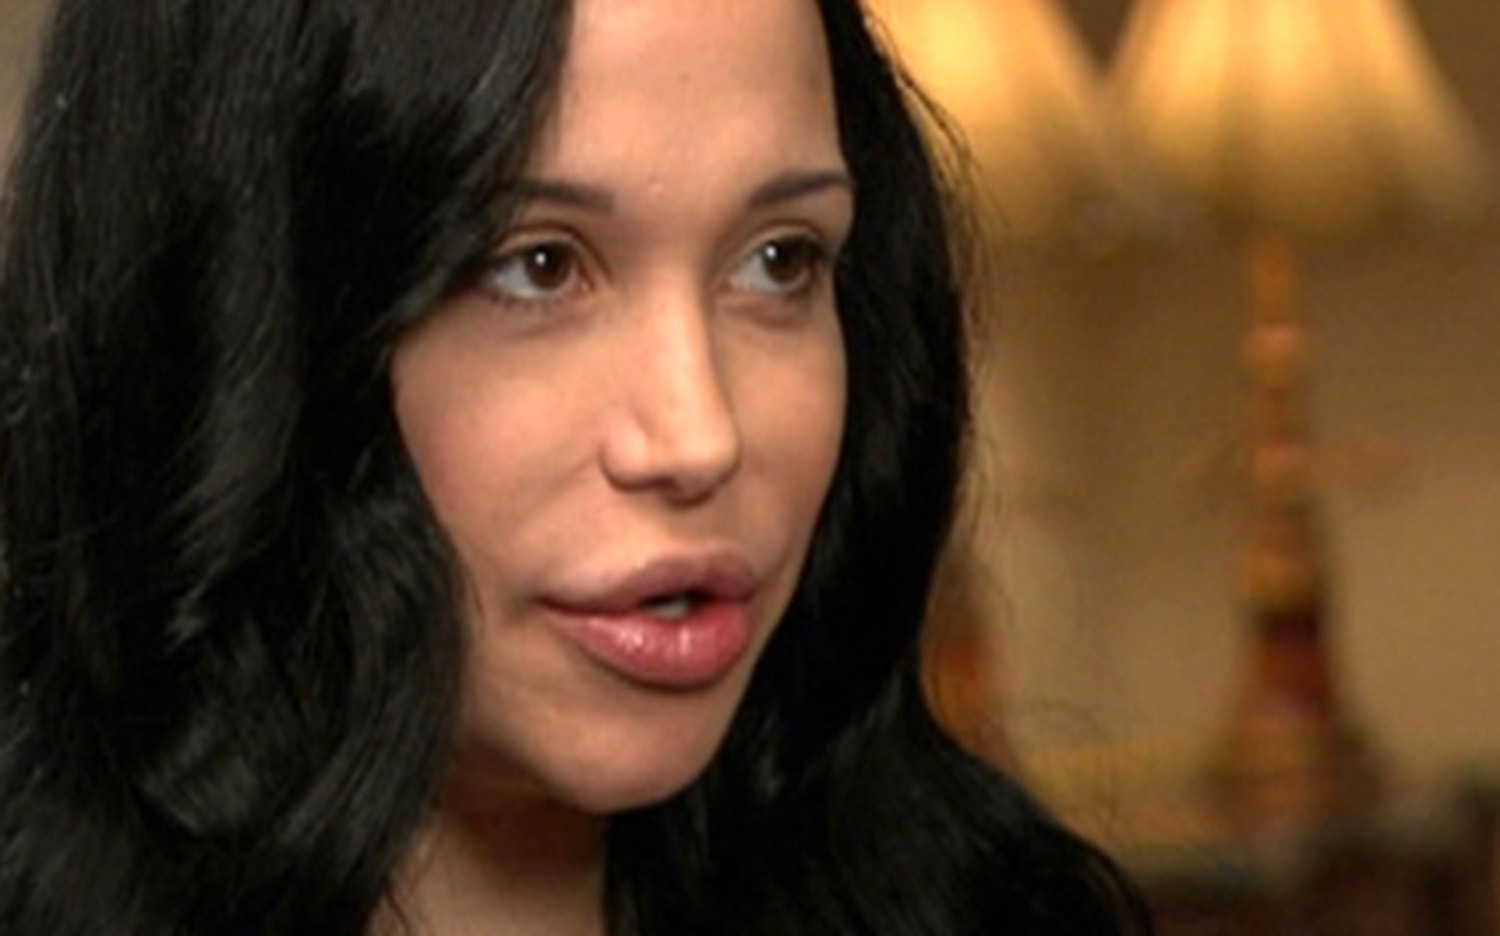 Xxxinden Hindemoves - Octomom Nadya Suleman 'thankful' her porn film is up for 4 awards